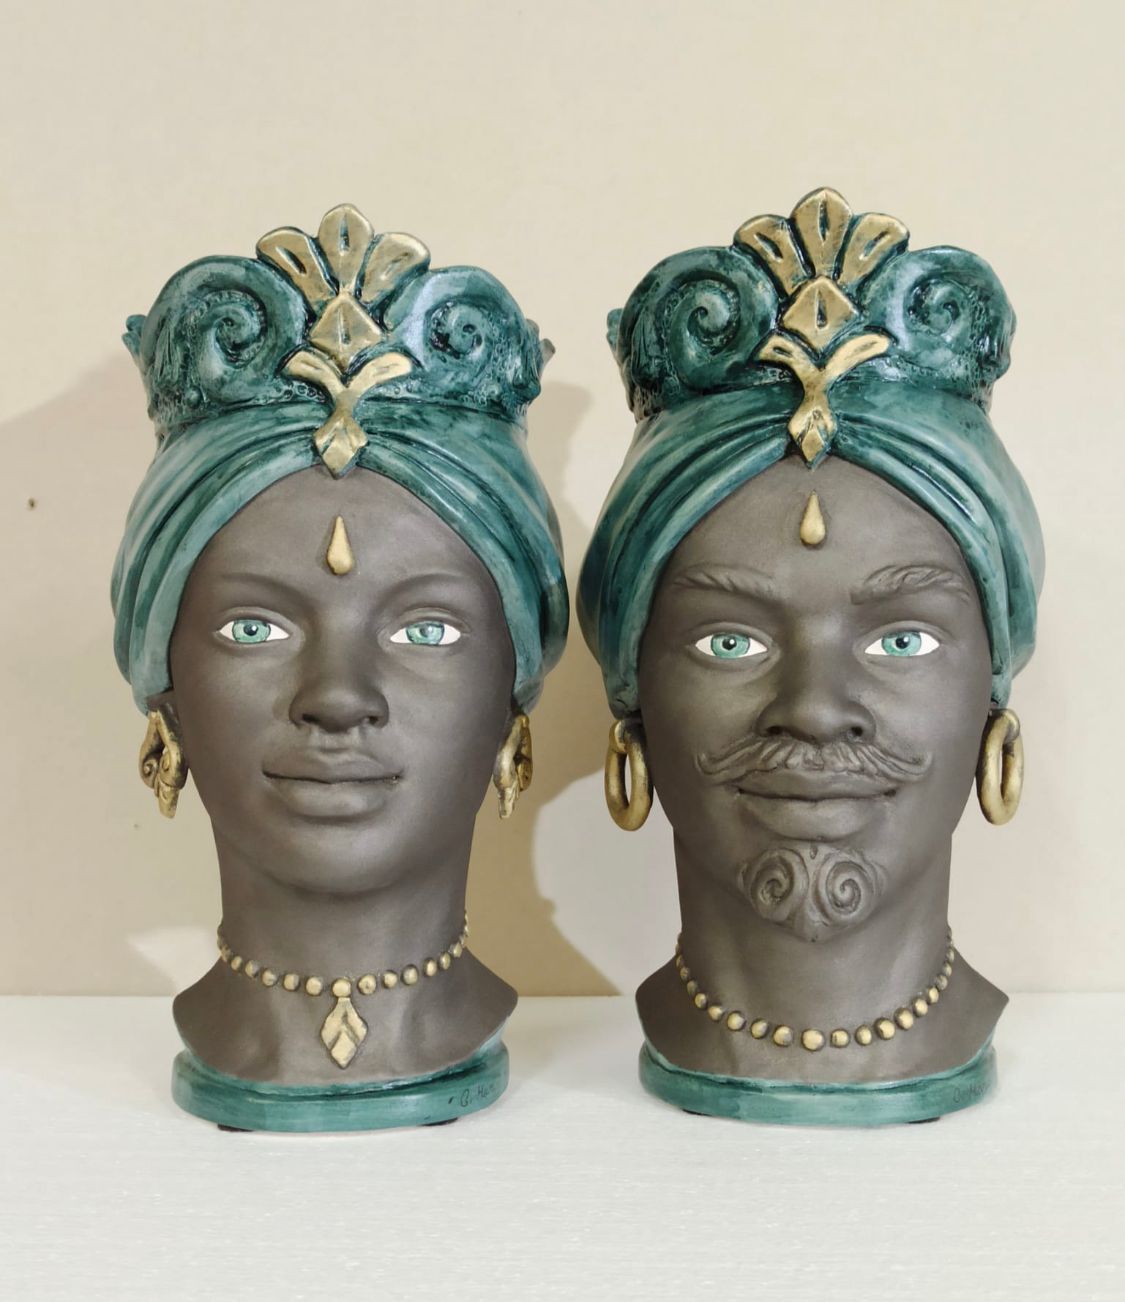 Pair of Moro's Heads with turquoise blue turban